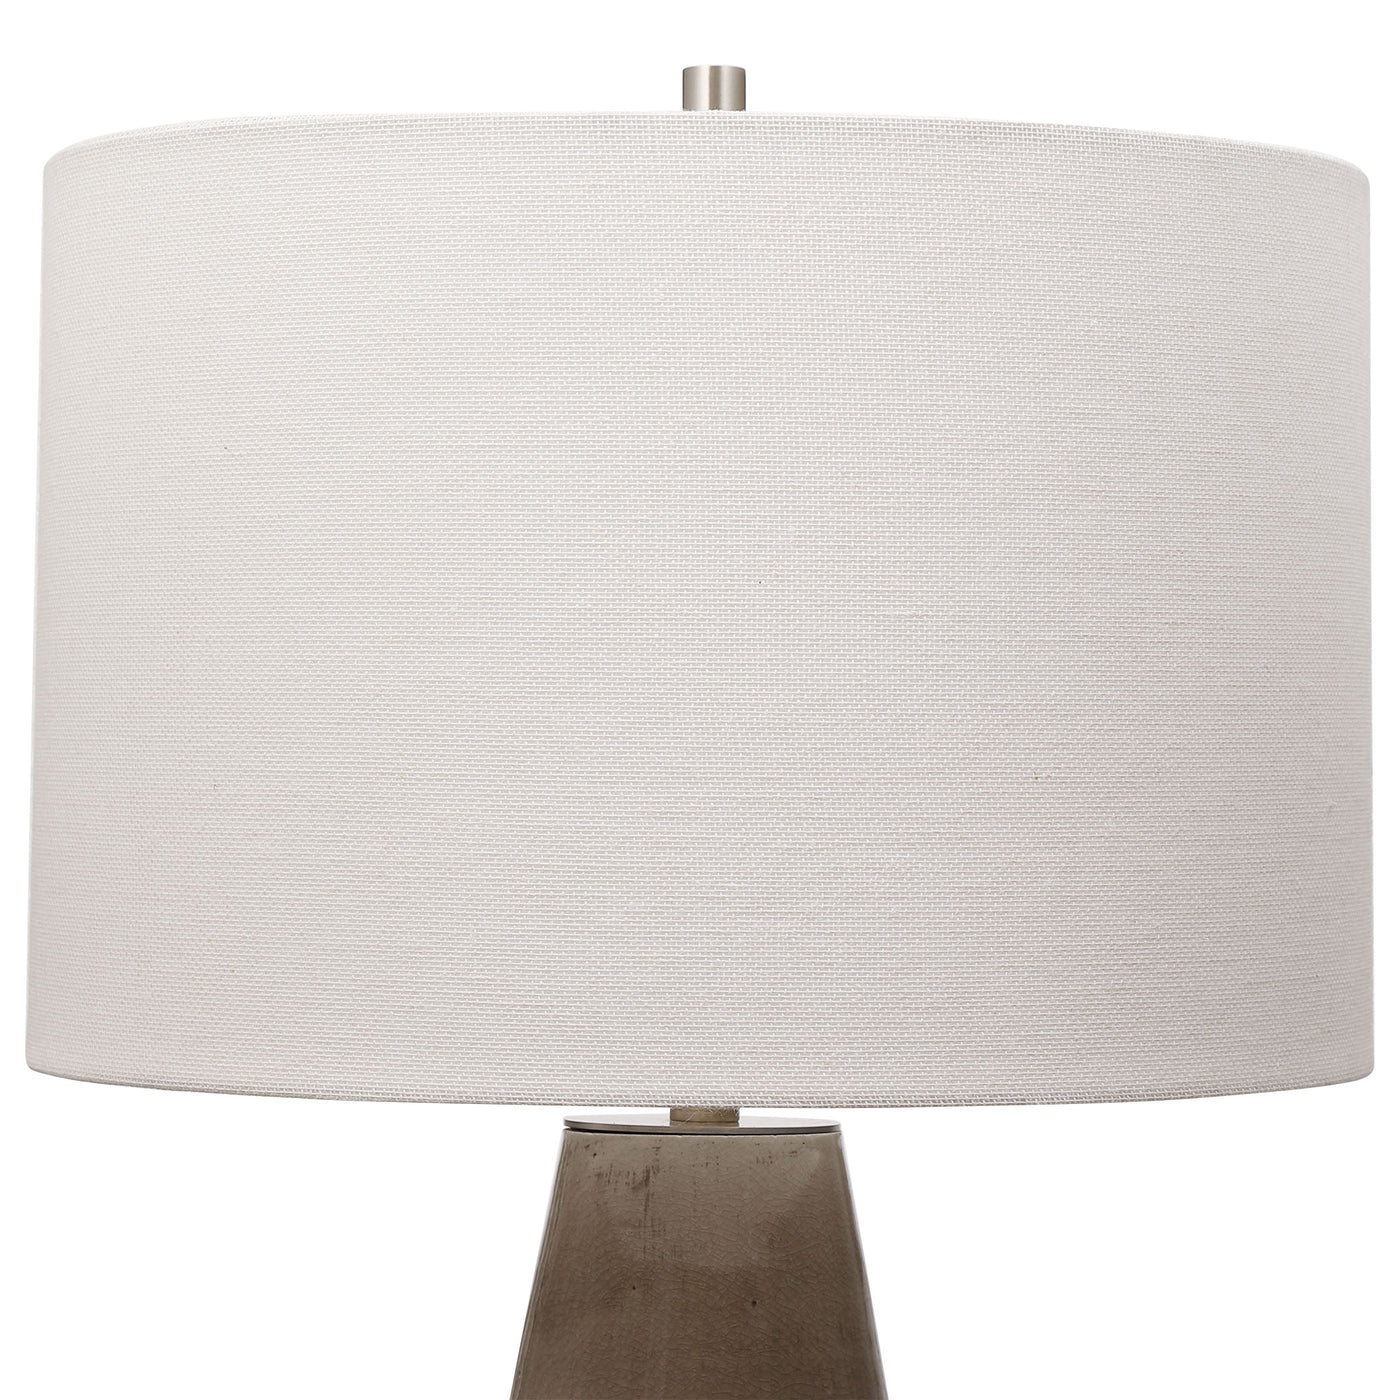 Simple Yet Stylish, This Ceramic Table Lamp Is Finished In A Crackled Taupe-gray Glaze With Noticeable Distressed Details ...